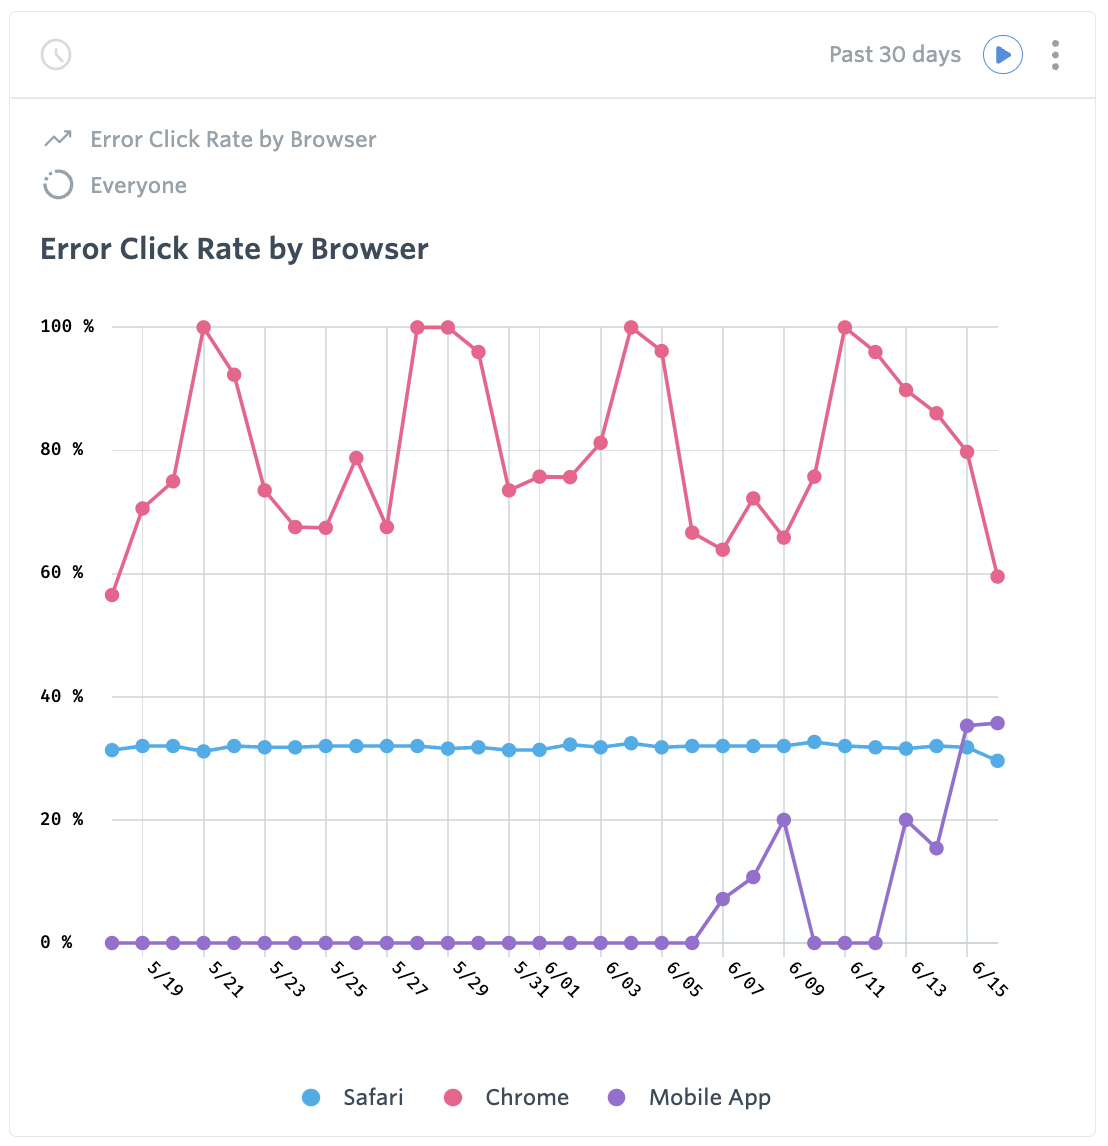 Error Click Rate by Browser